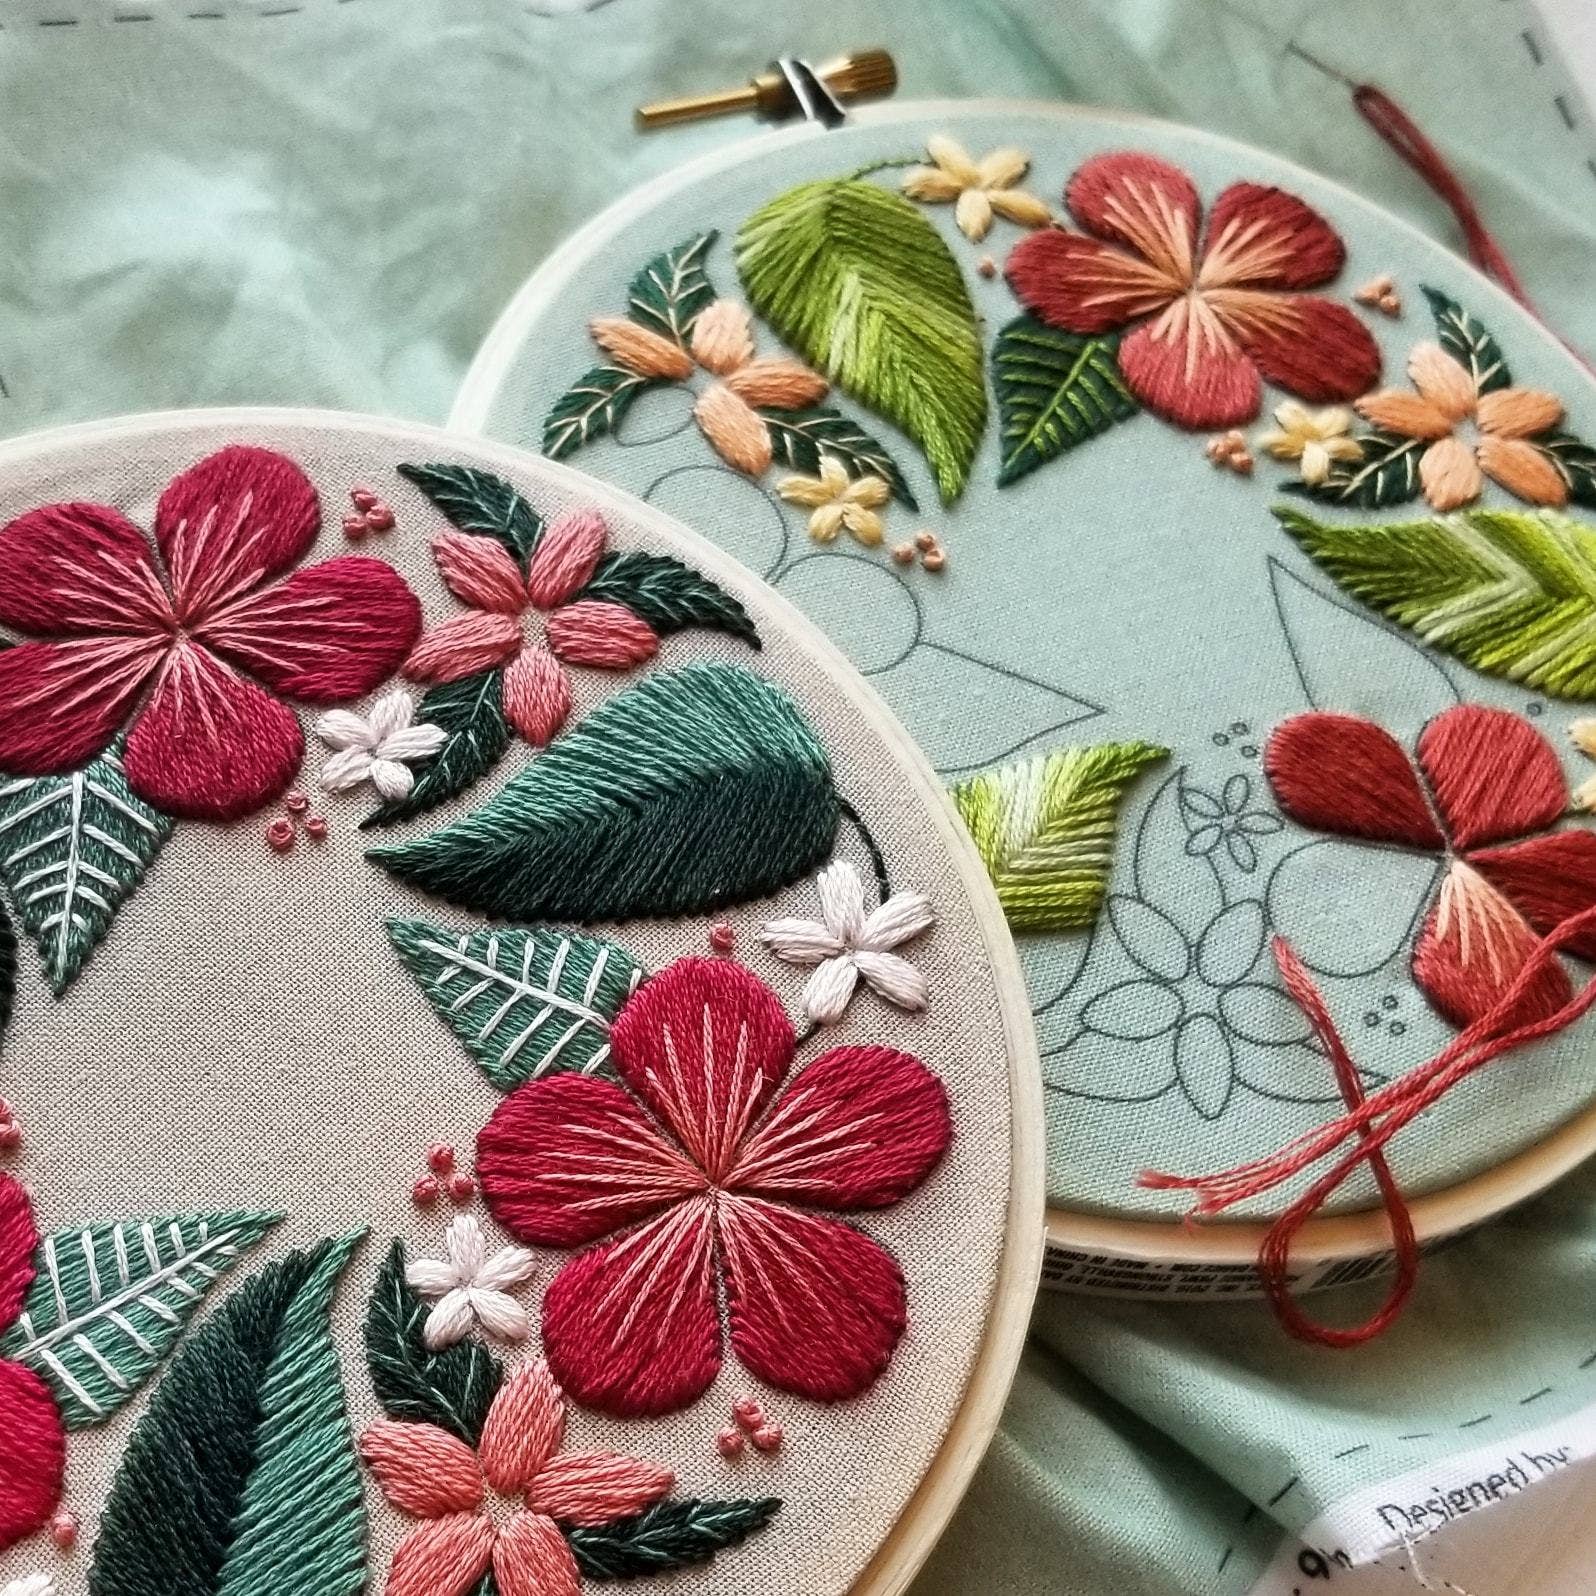 Flower Embroidery Kit for Beginners with Pattern and Instructions, Cross  Stitch Set, Make your spring embroidery pieces. Green plants are the